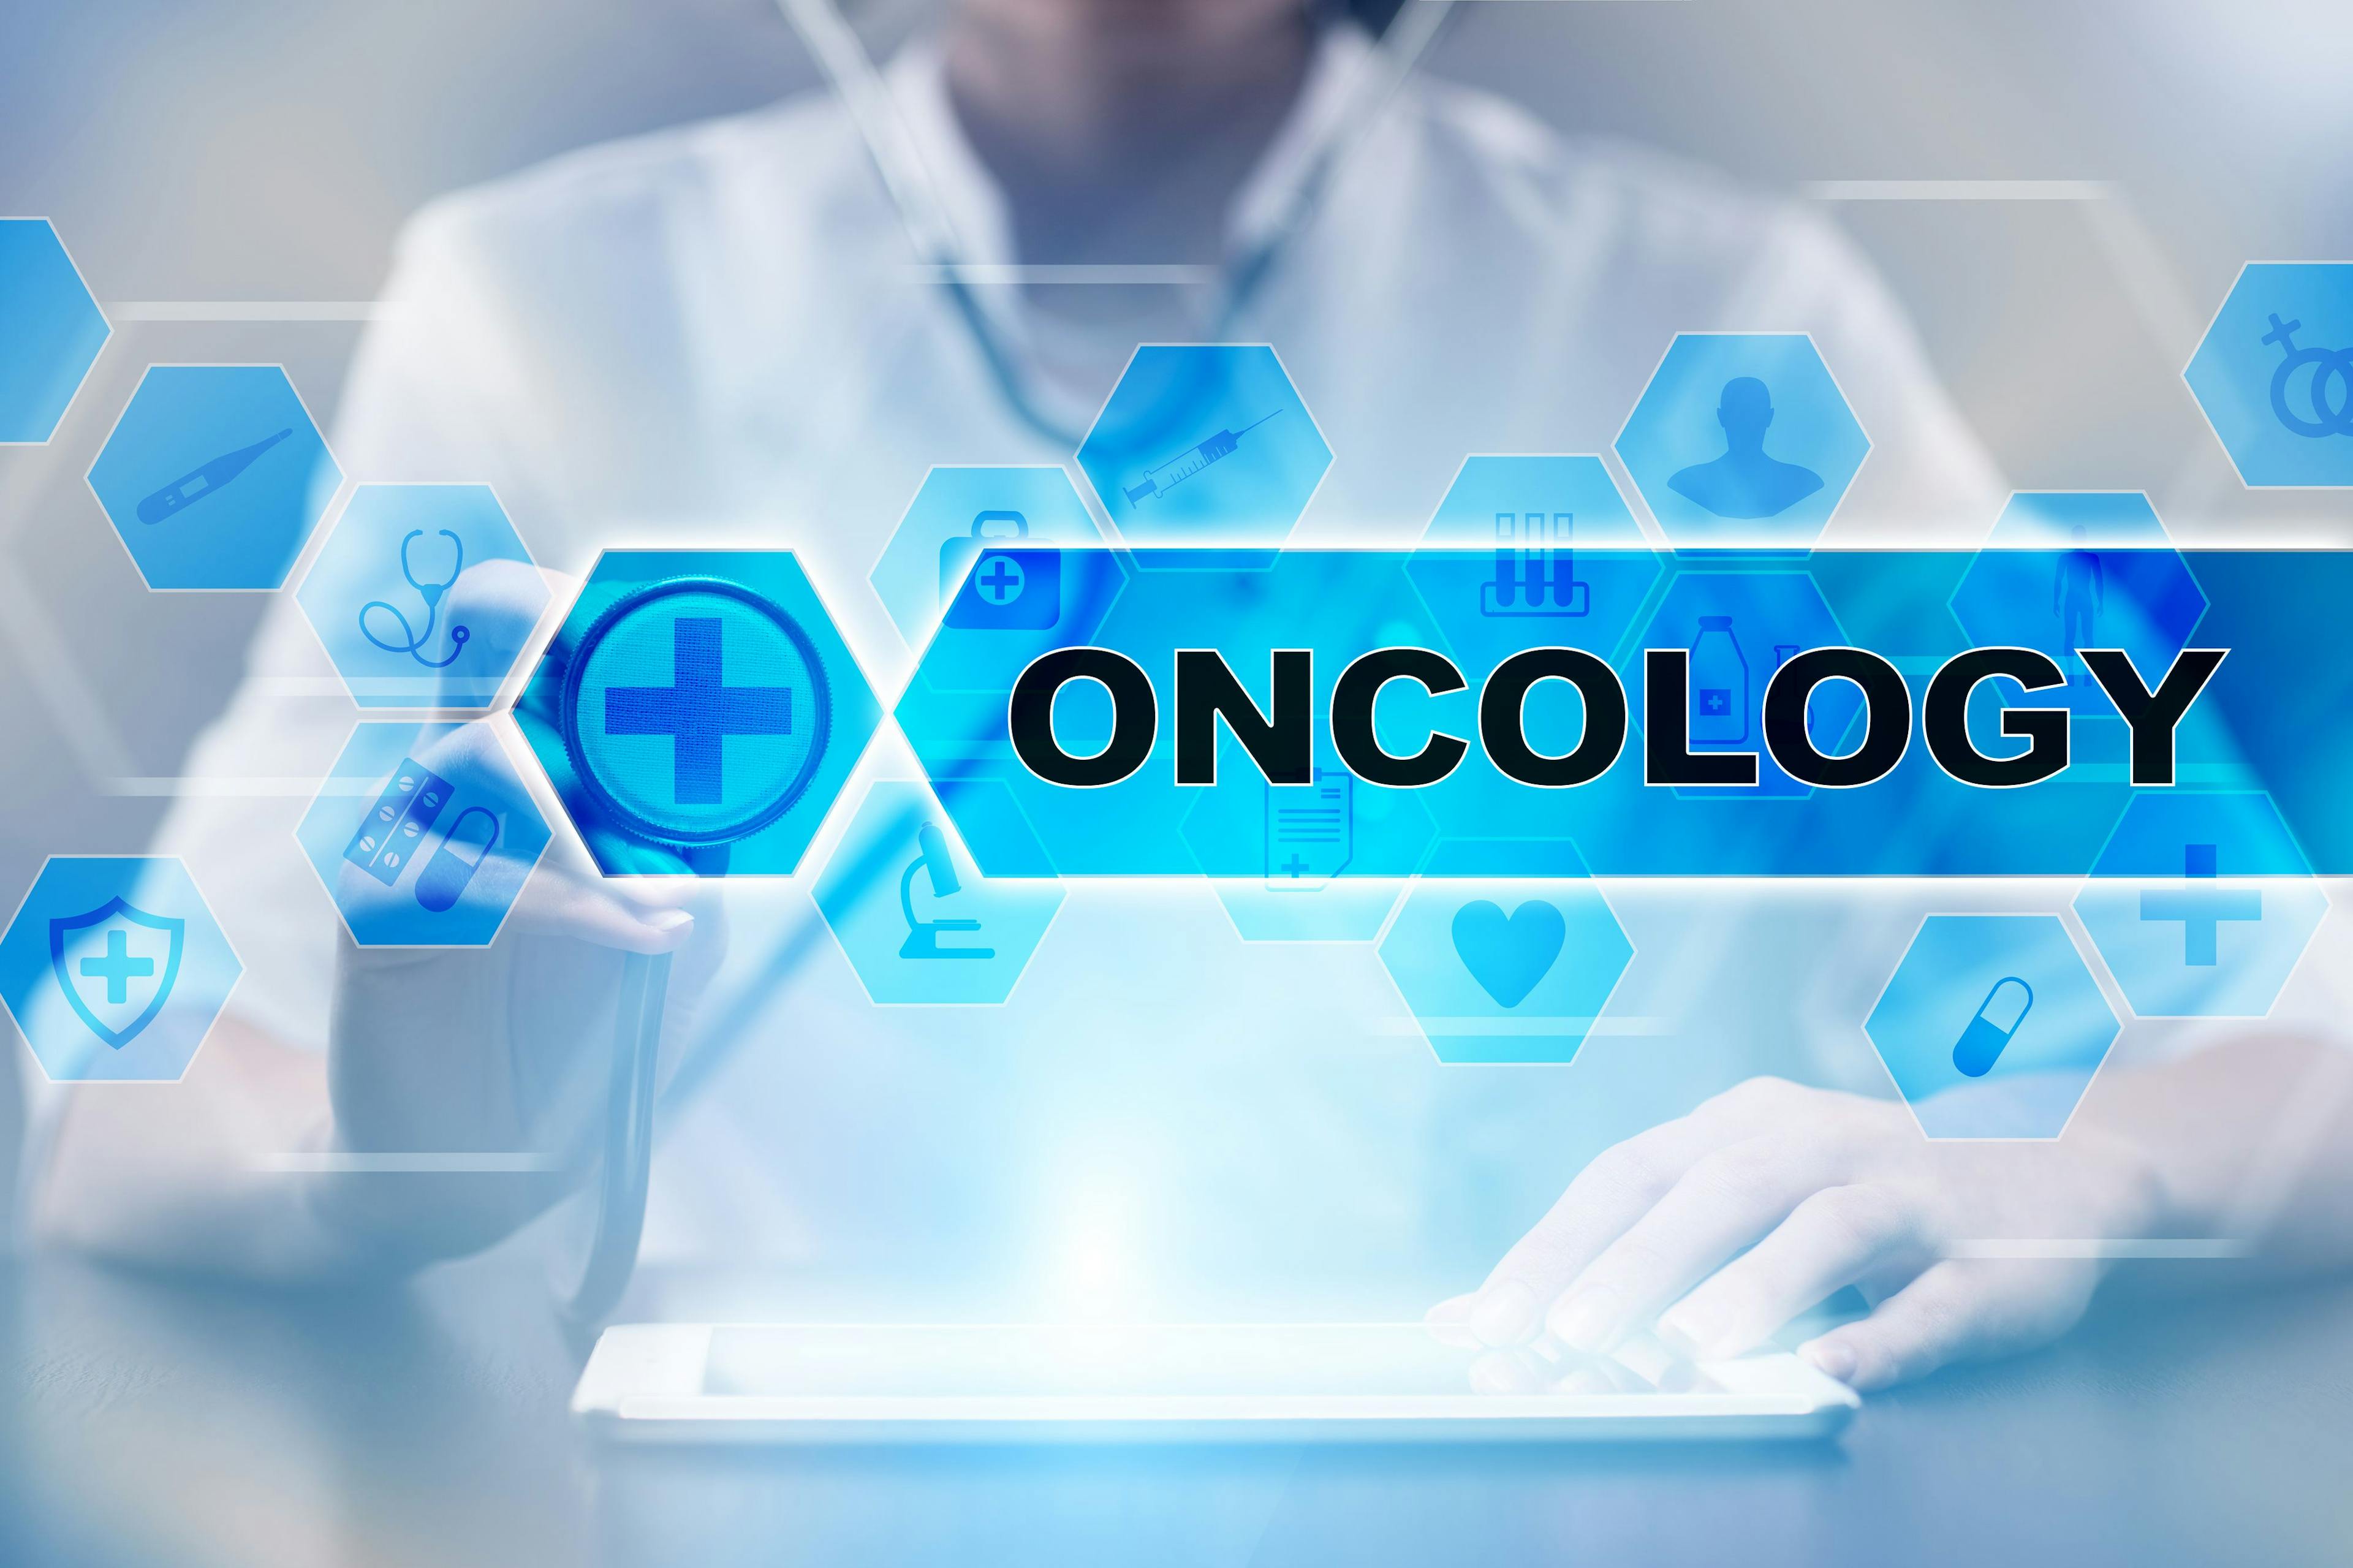 Clinician Using Tablet Oncology Concept | image credit: WrightStudio - stock.adobe.com